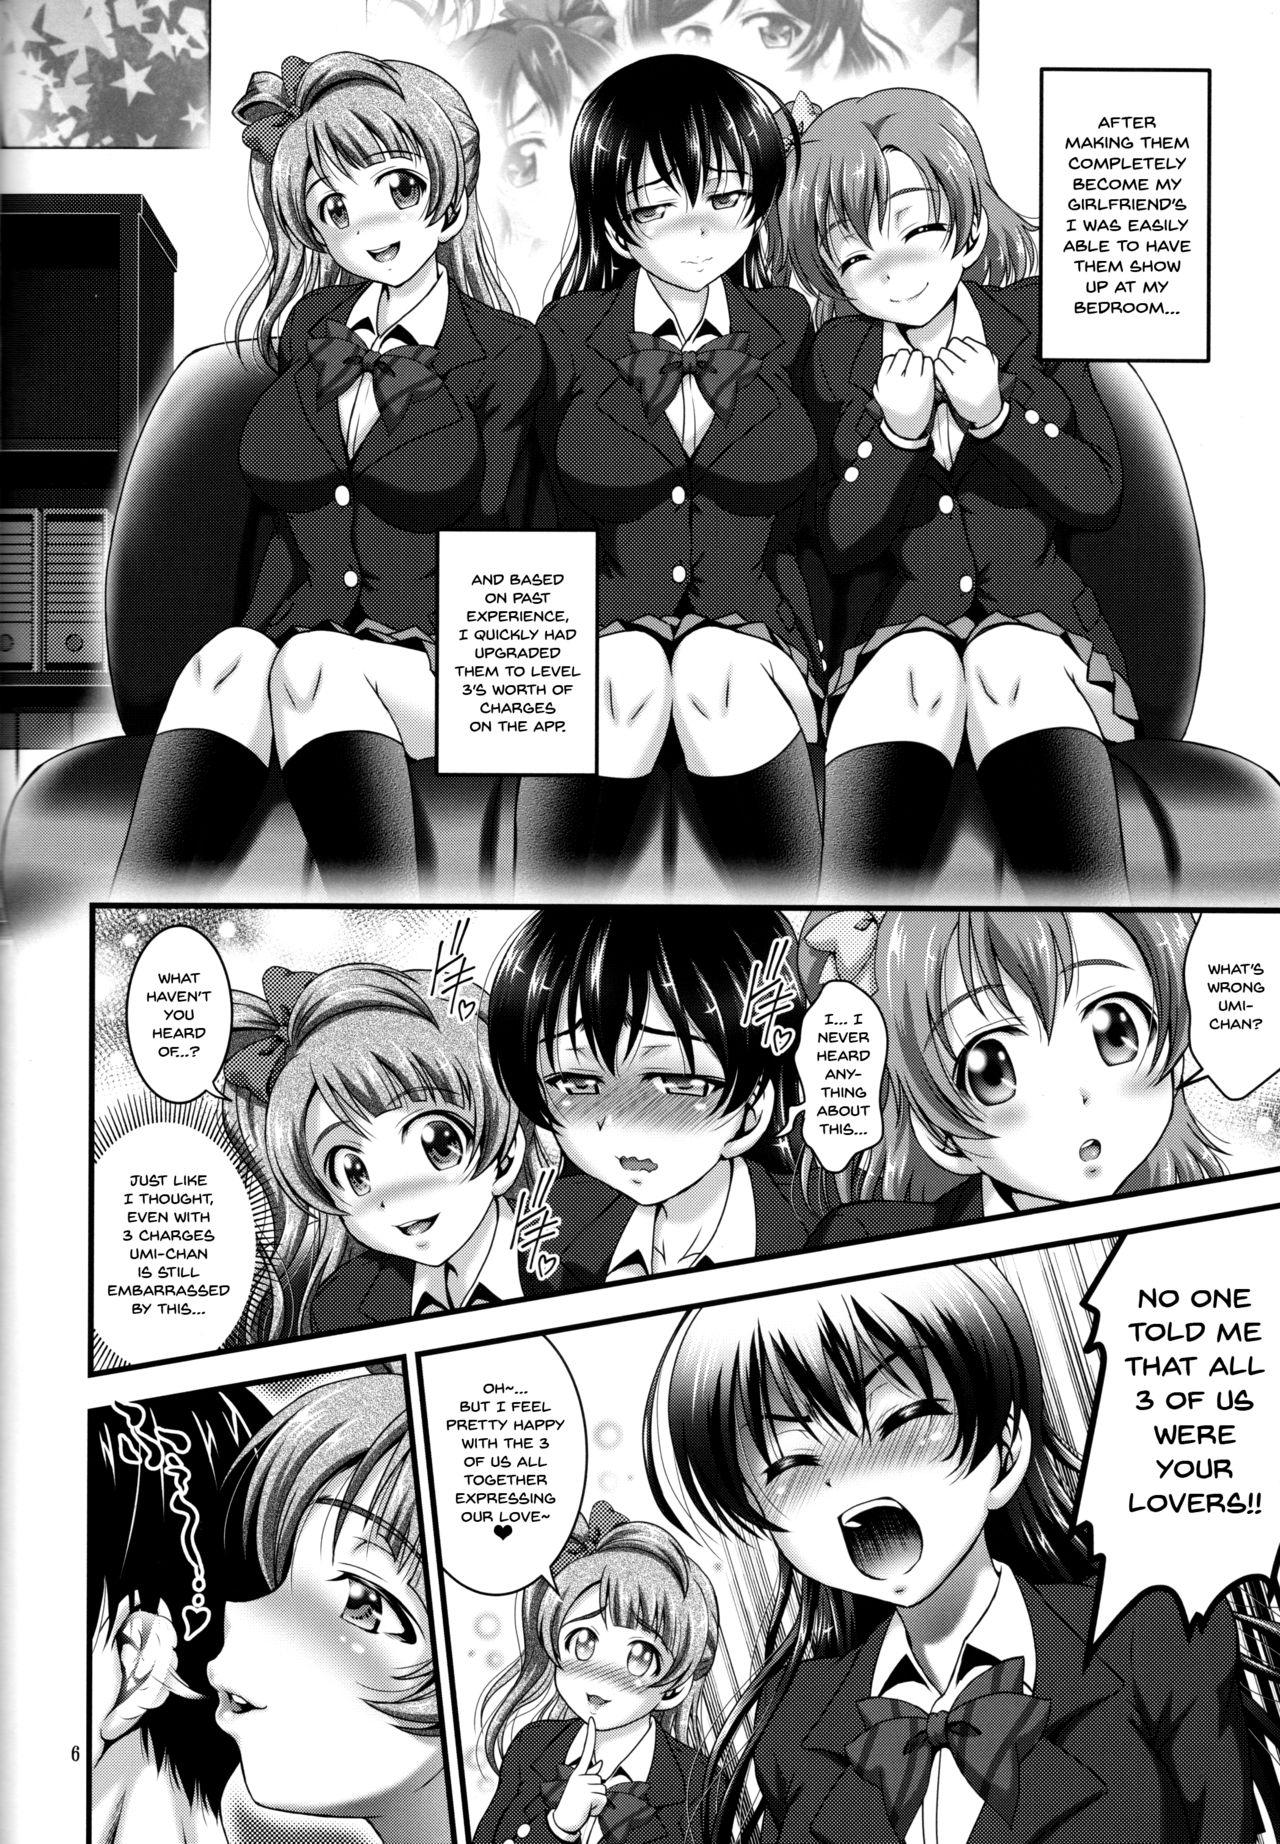 Bra Ore Yome Saimin 4 | My Wife Hypnosis 4 - Love live Submissive - Page 7